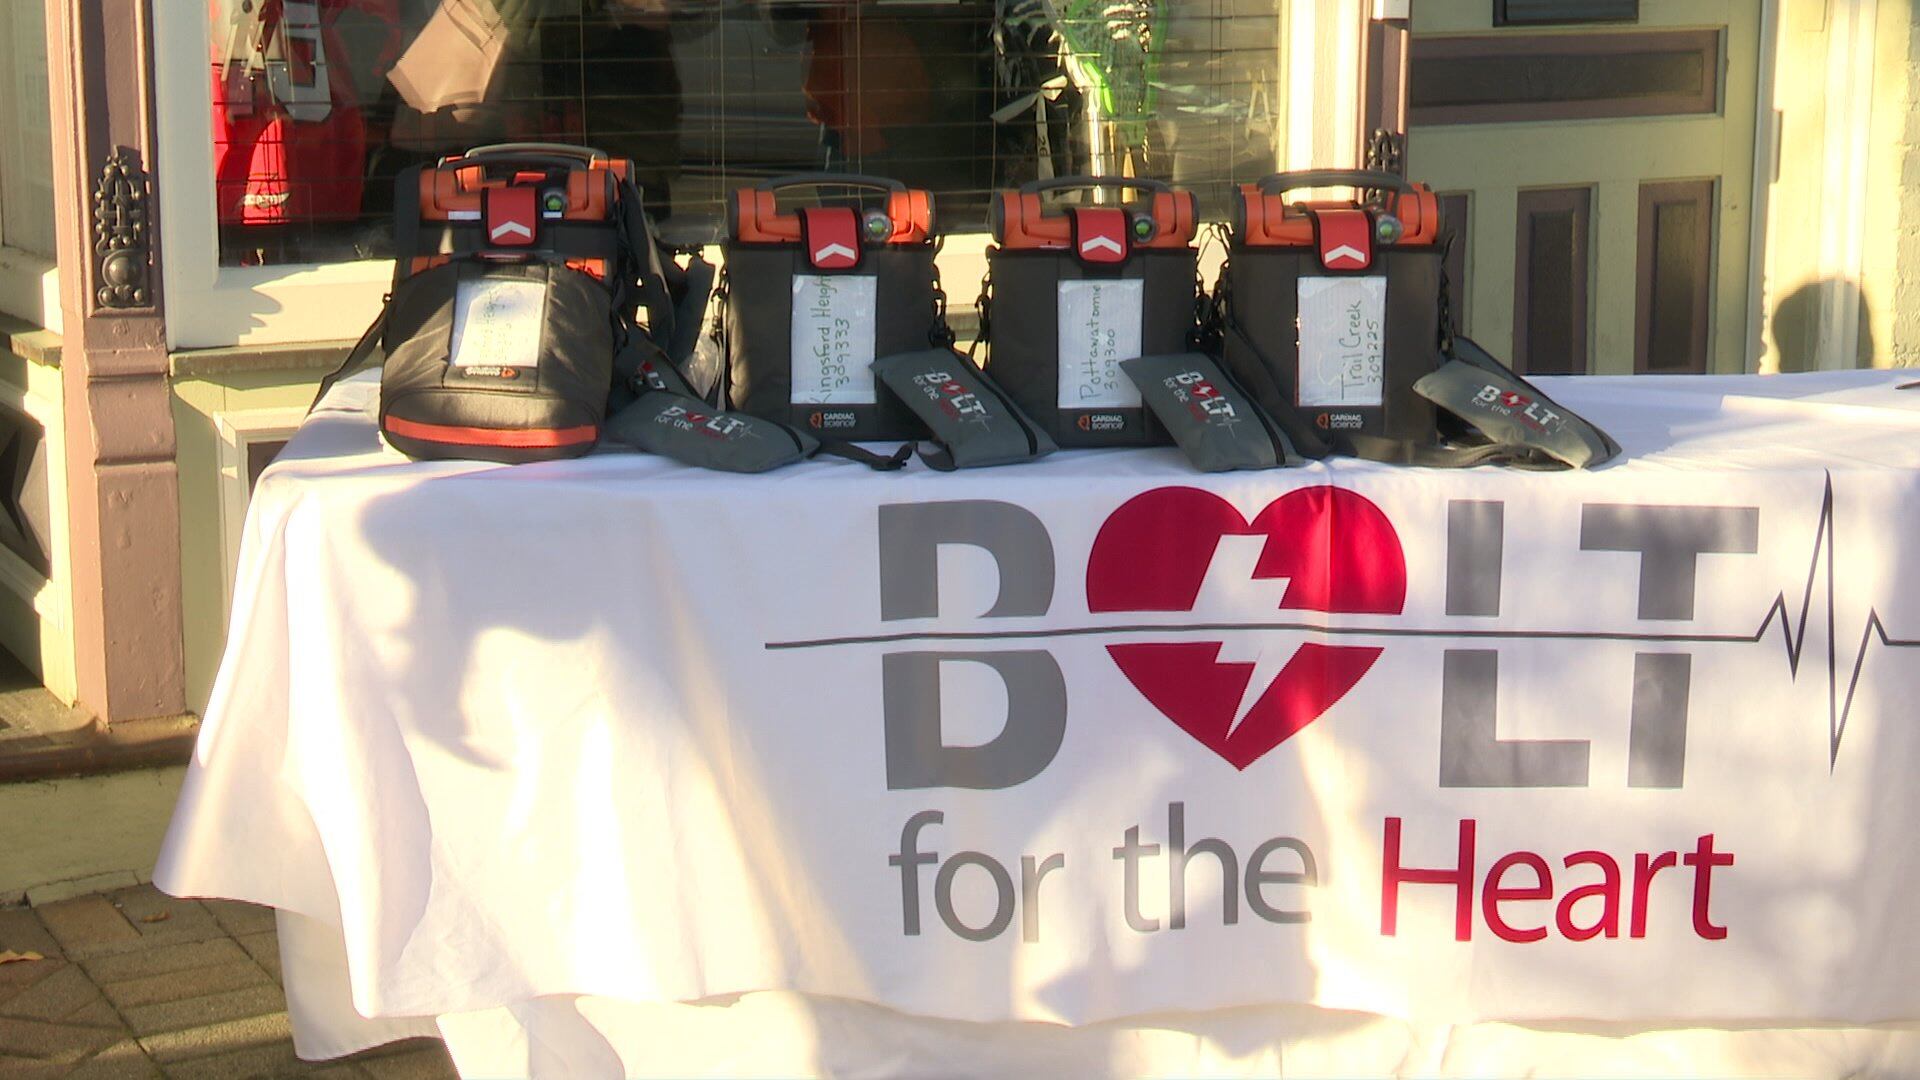 Every law enforcement vehicle in LaPorte County has life-saving automatic external defibrillator